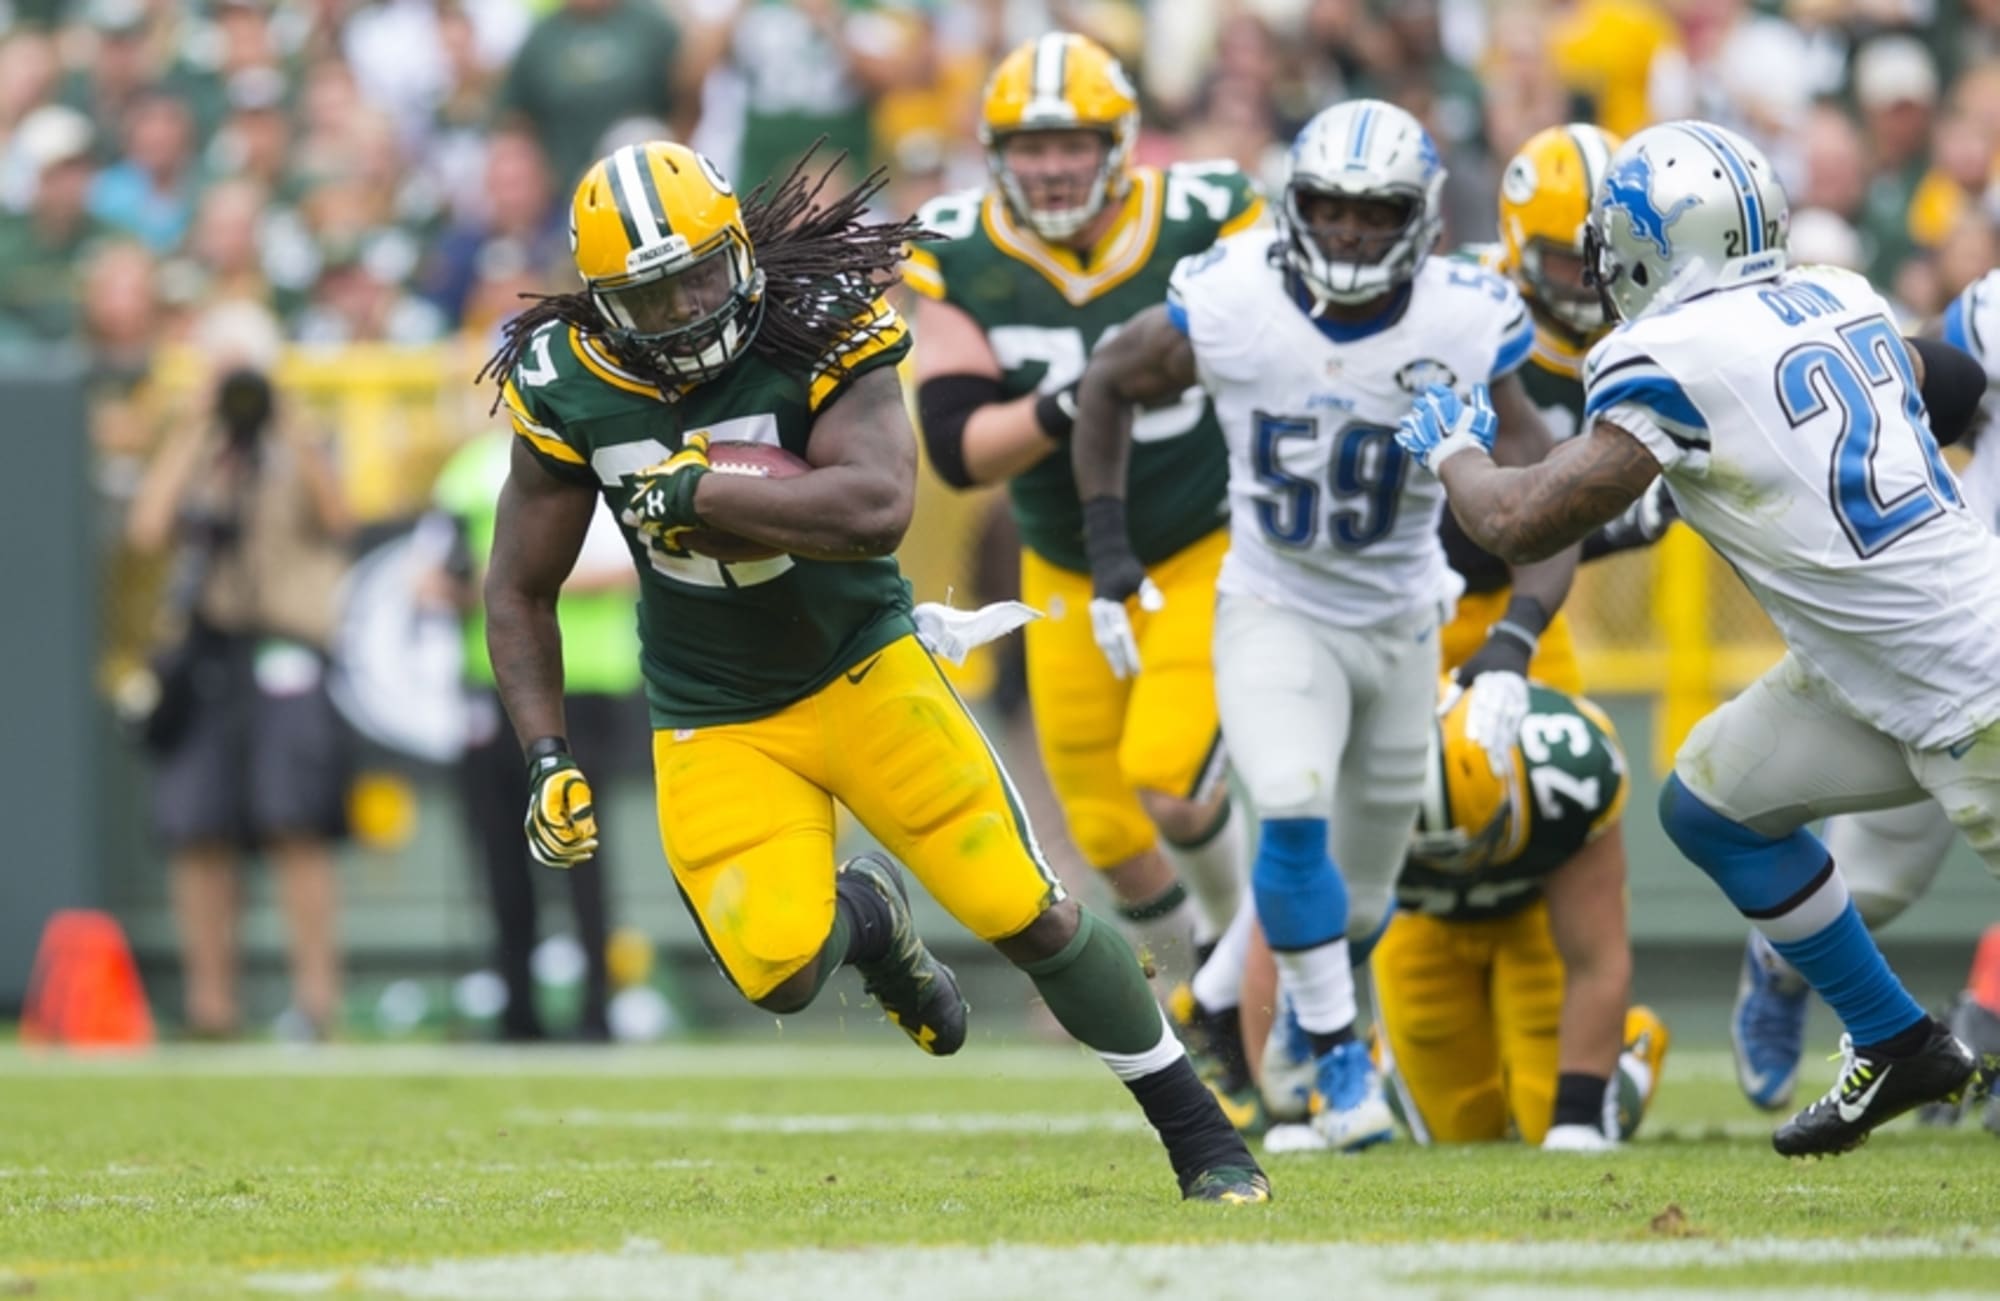 Green Bay Packers vs. Detroit Lions Postgame first impressions